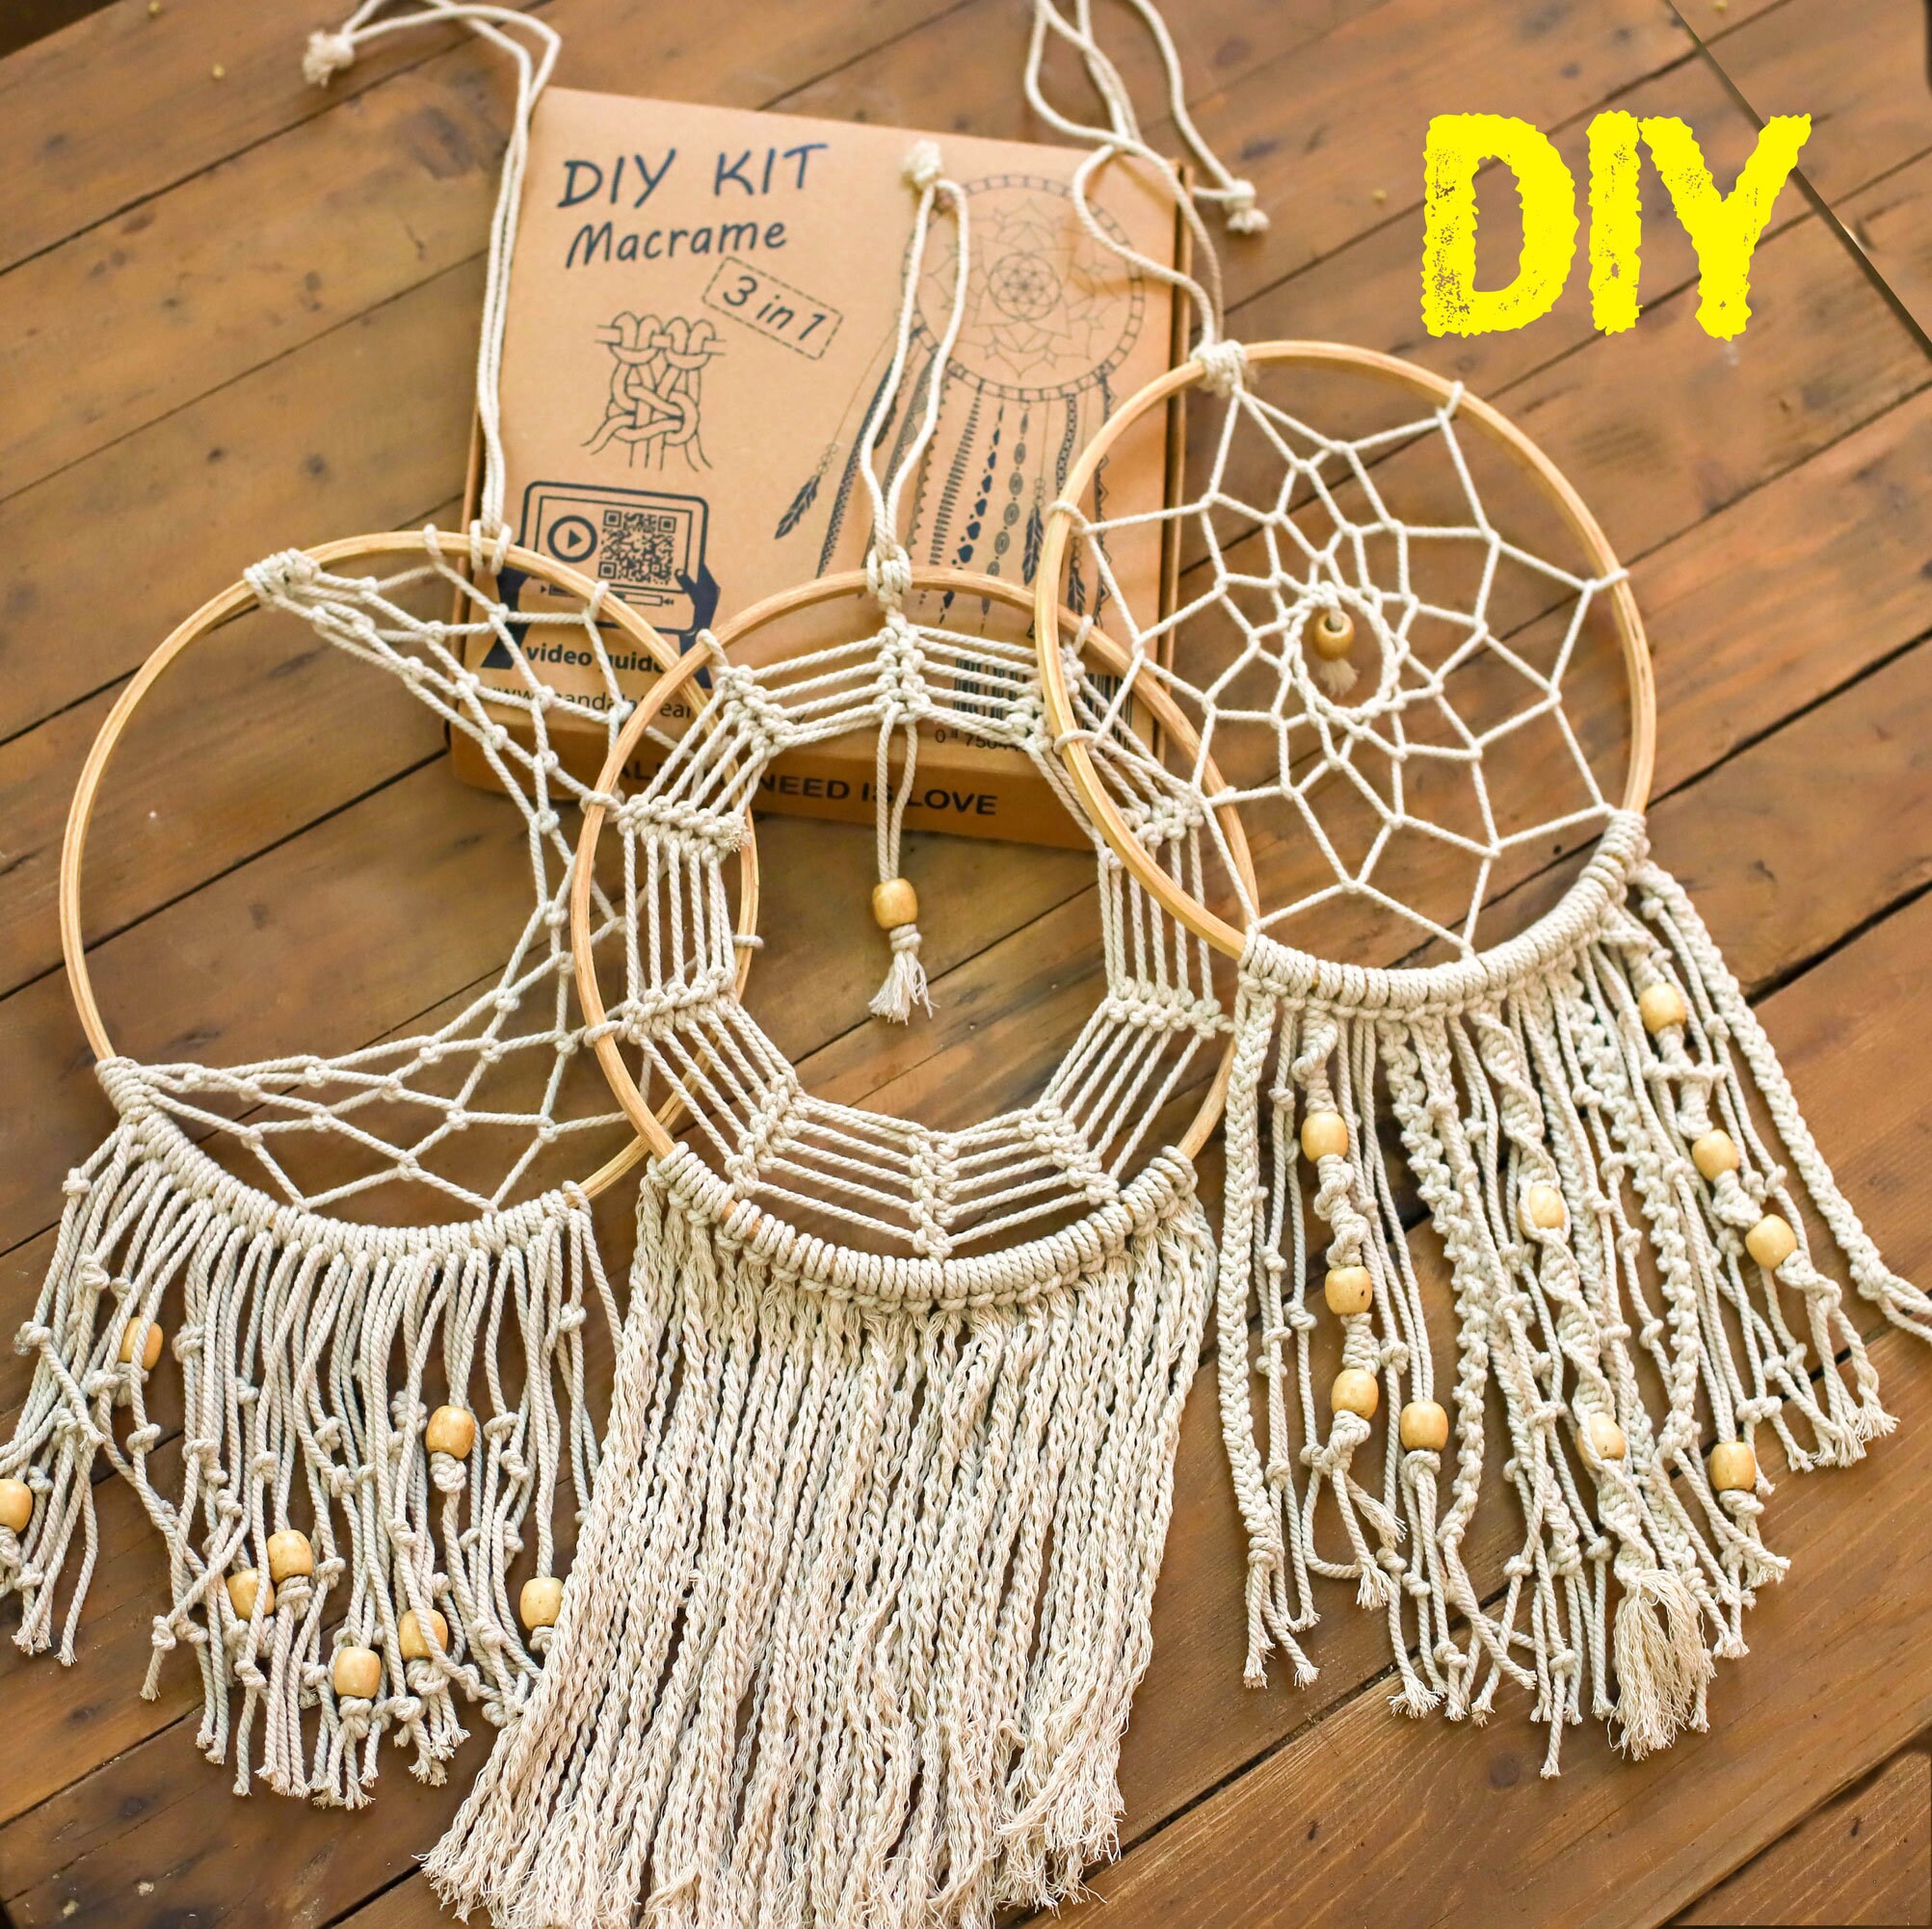  Moon+Star Macrame Kit, 2 in 1 Macrame Kits for Adults  Beginners, Includes Macrame Cord and Instruction with Video, Macrame Wall  Hanging Supplies, Craft Kits for Adults DIY Dream Catcher Kit 